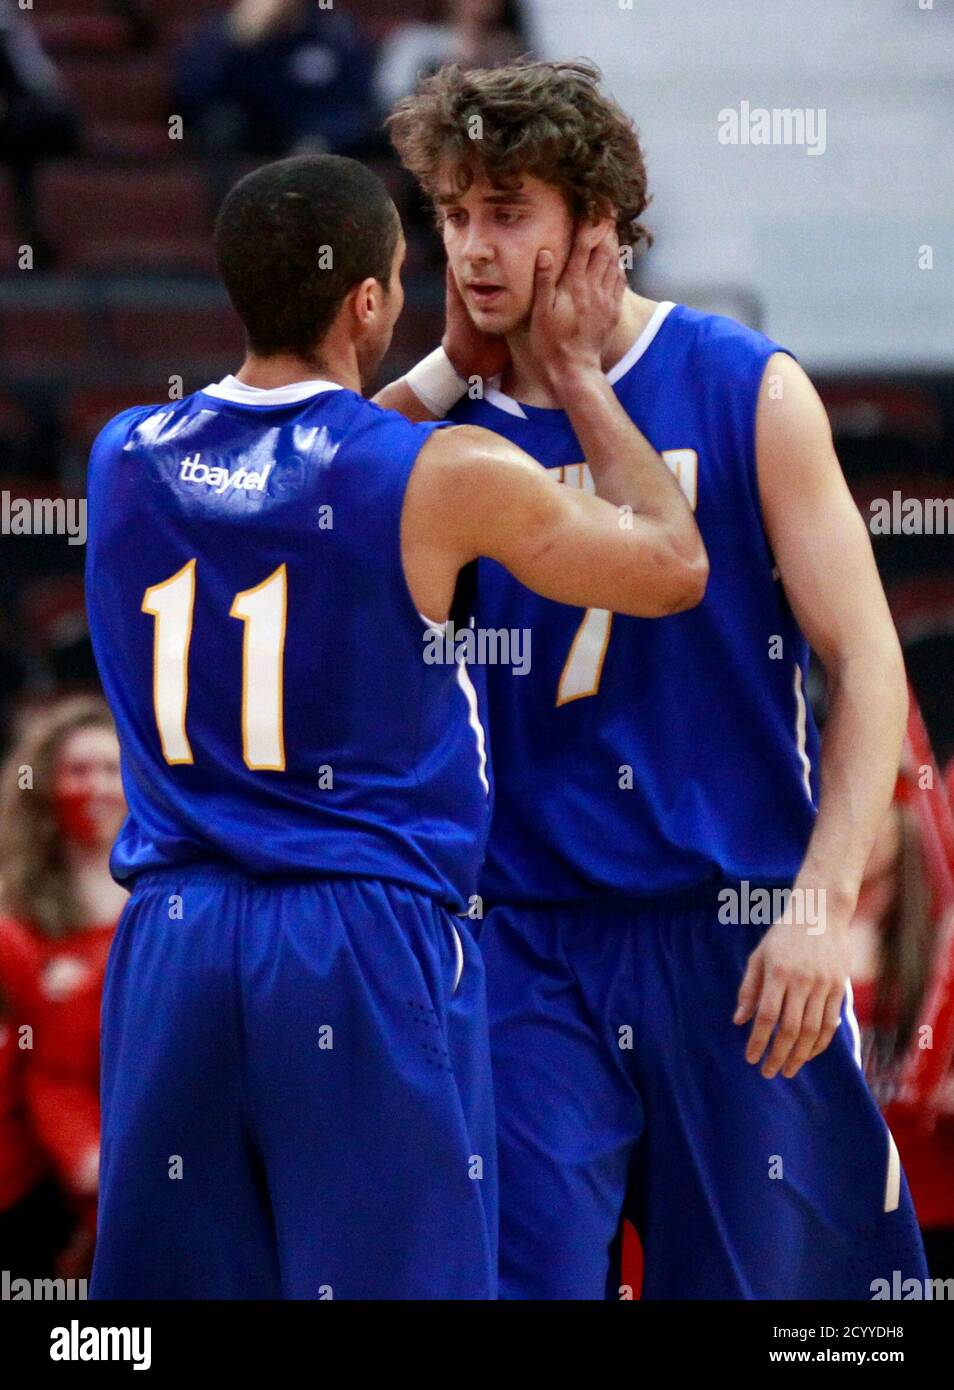 Lakehead Thunderwolves' Ben Johnson (L) speaks with teammate Joseph Nitychoruk during the first half of their Canadian Interuniversity Sport championship basketball game against the Carleton University Ravens in Ottawa March 10, 2013.  REUTERS/Blair Gable (CANADA - Tags: SPORT BASKETBALL) Stock Photo